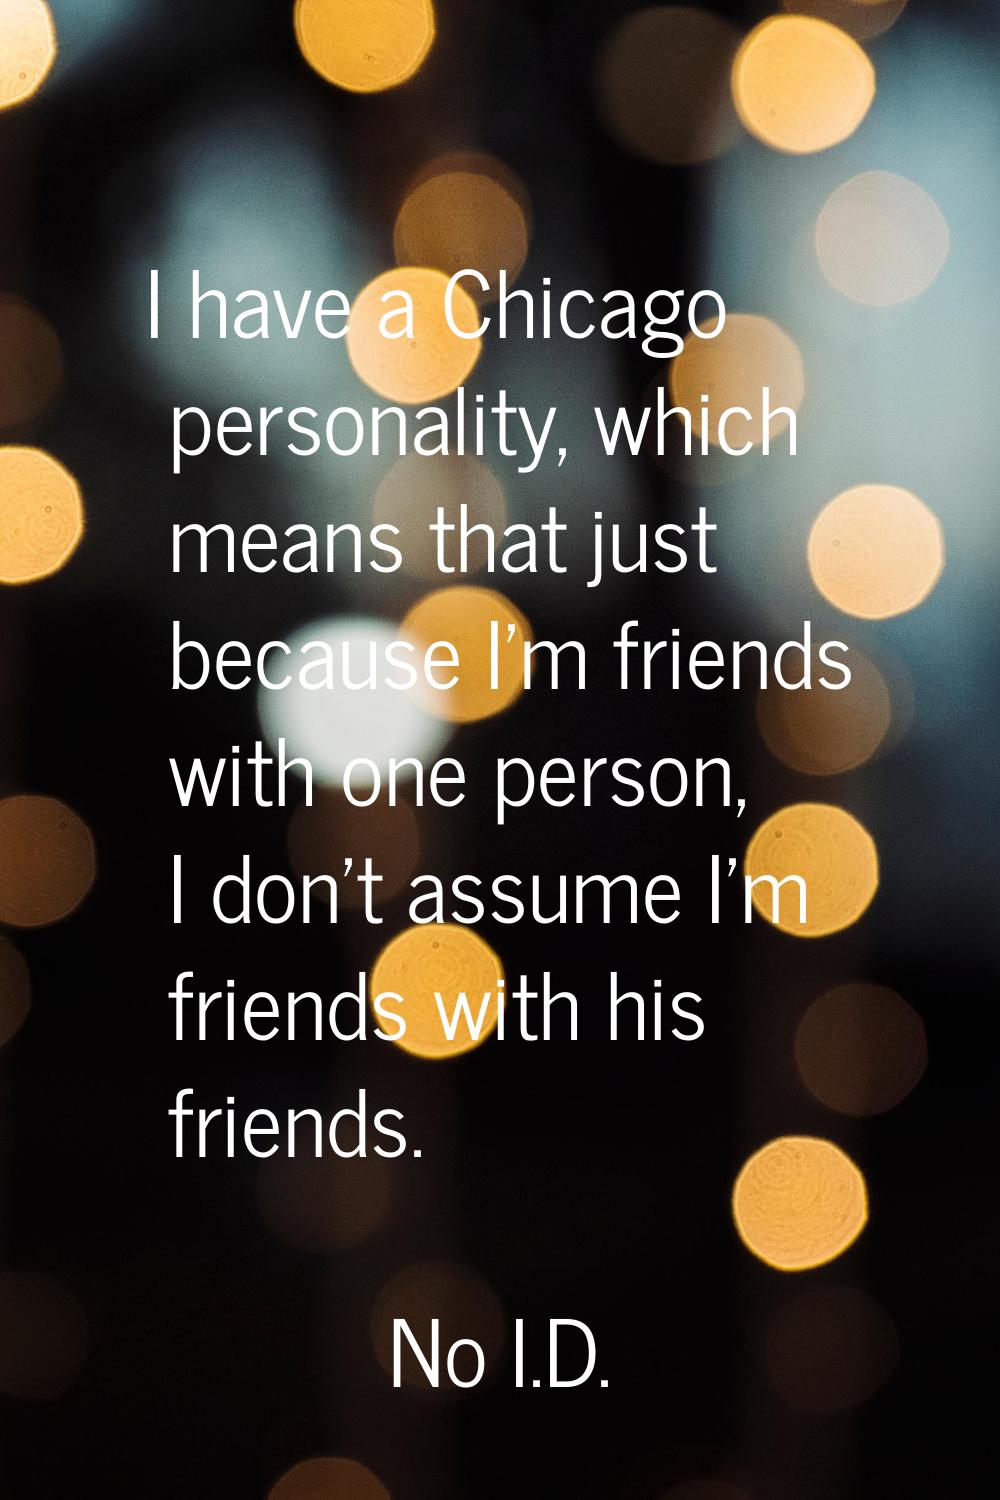 I have a Chicago personality, which means that just because I'm friends with one person, I don't as